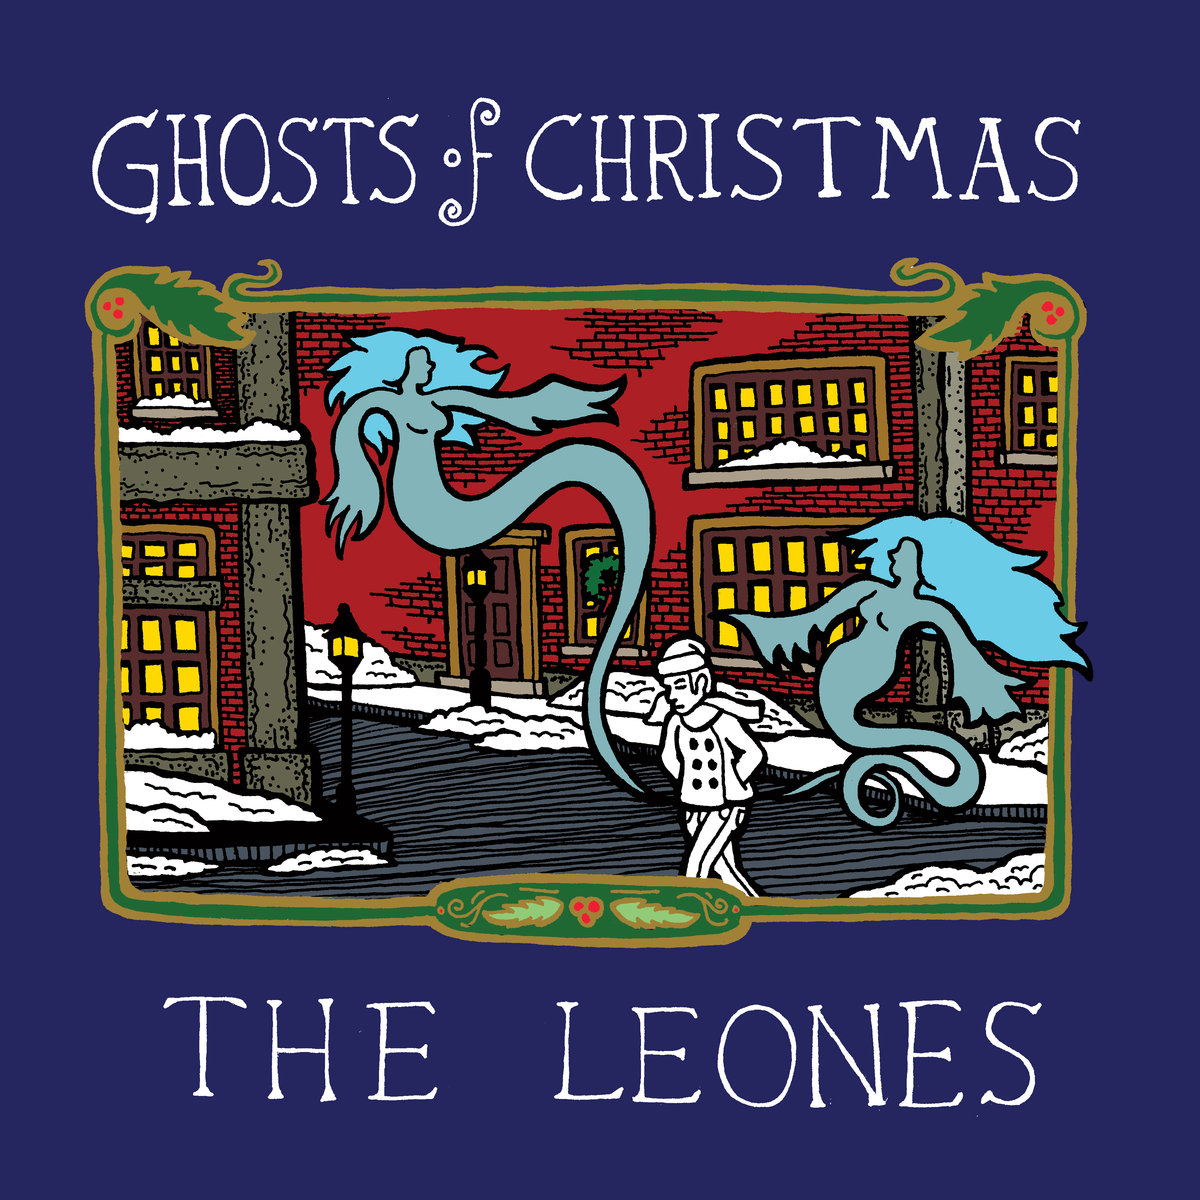 The Leones Share Two New Christmas Songs